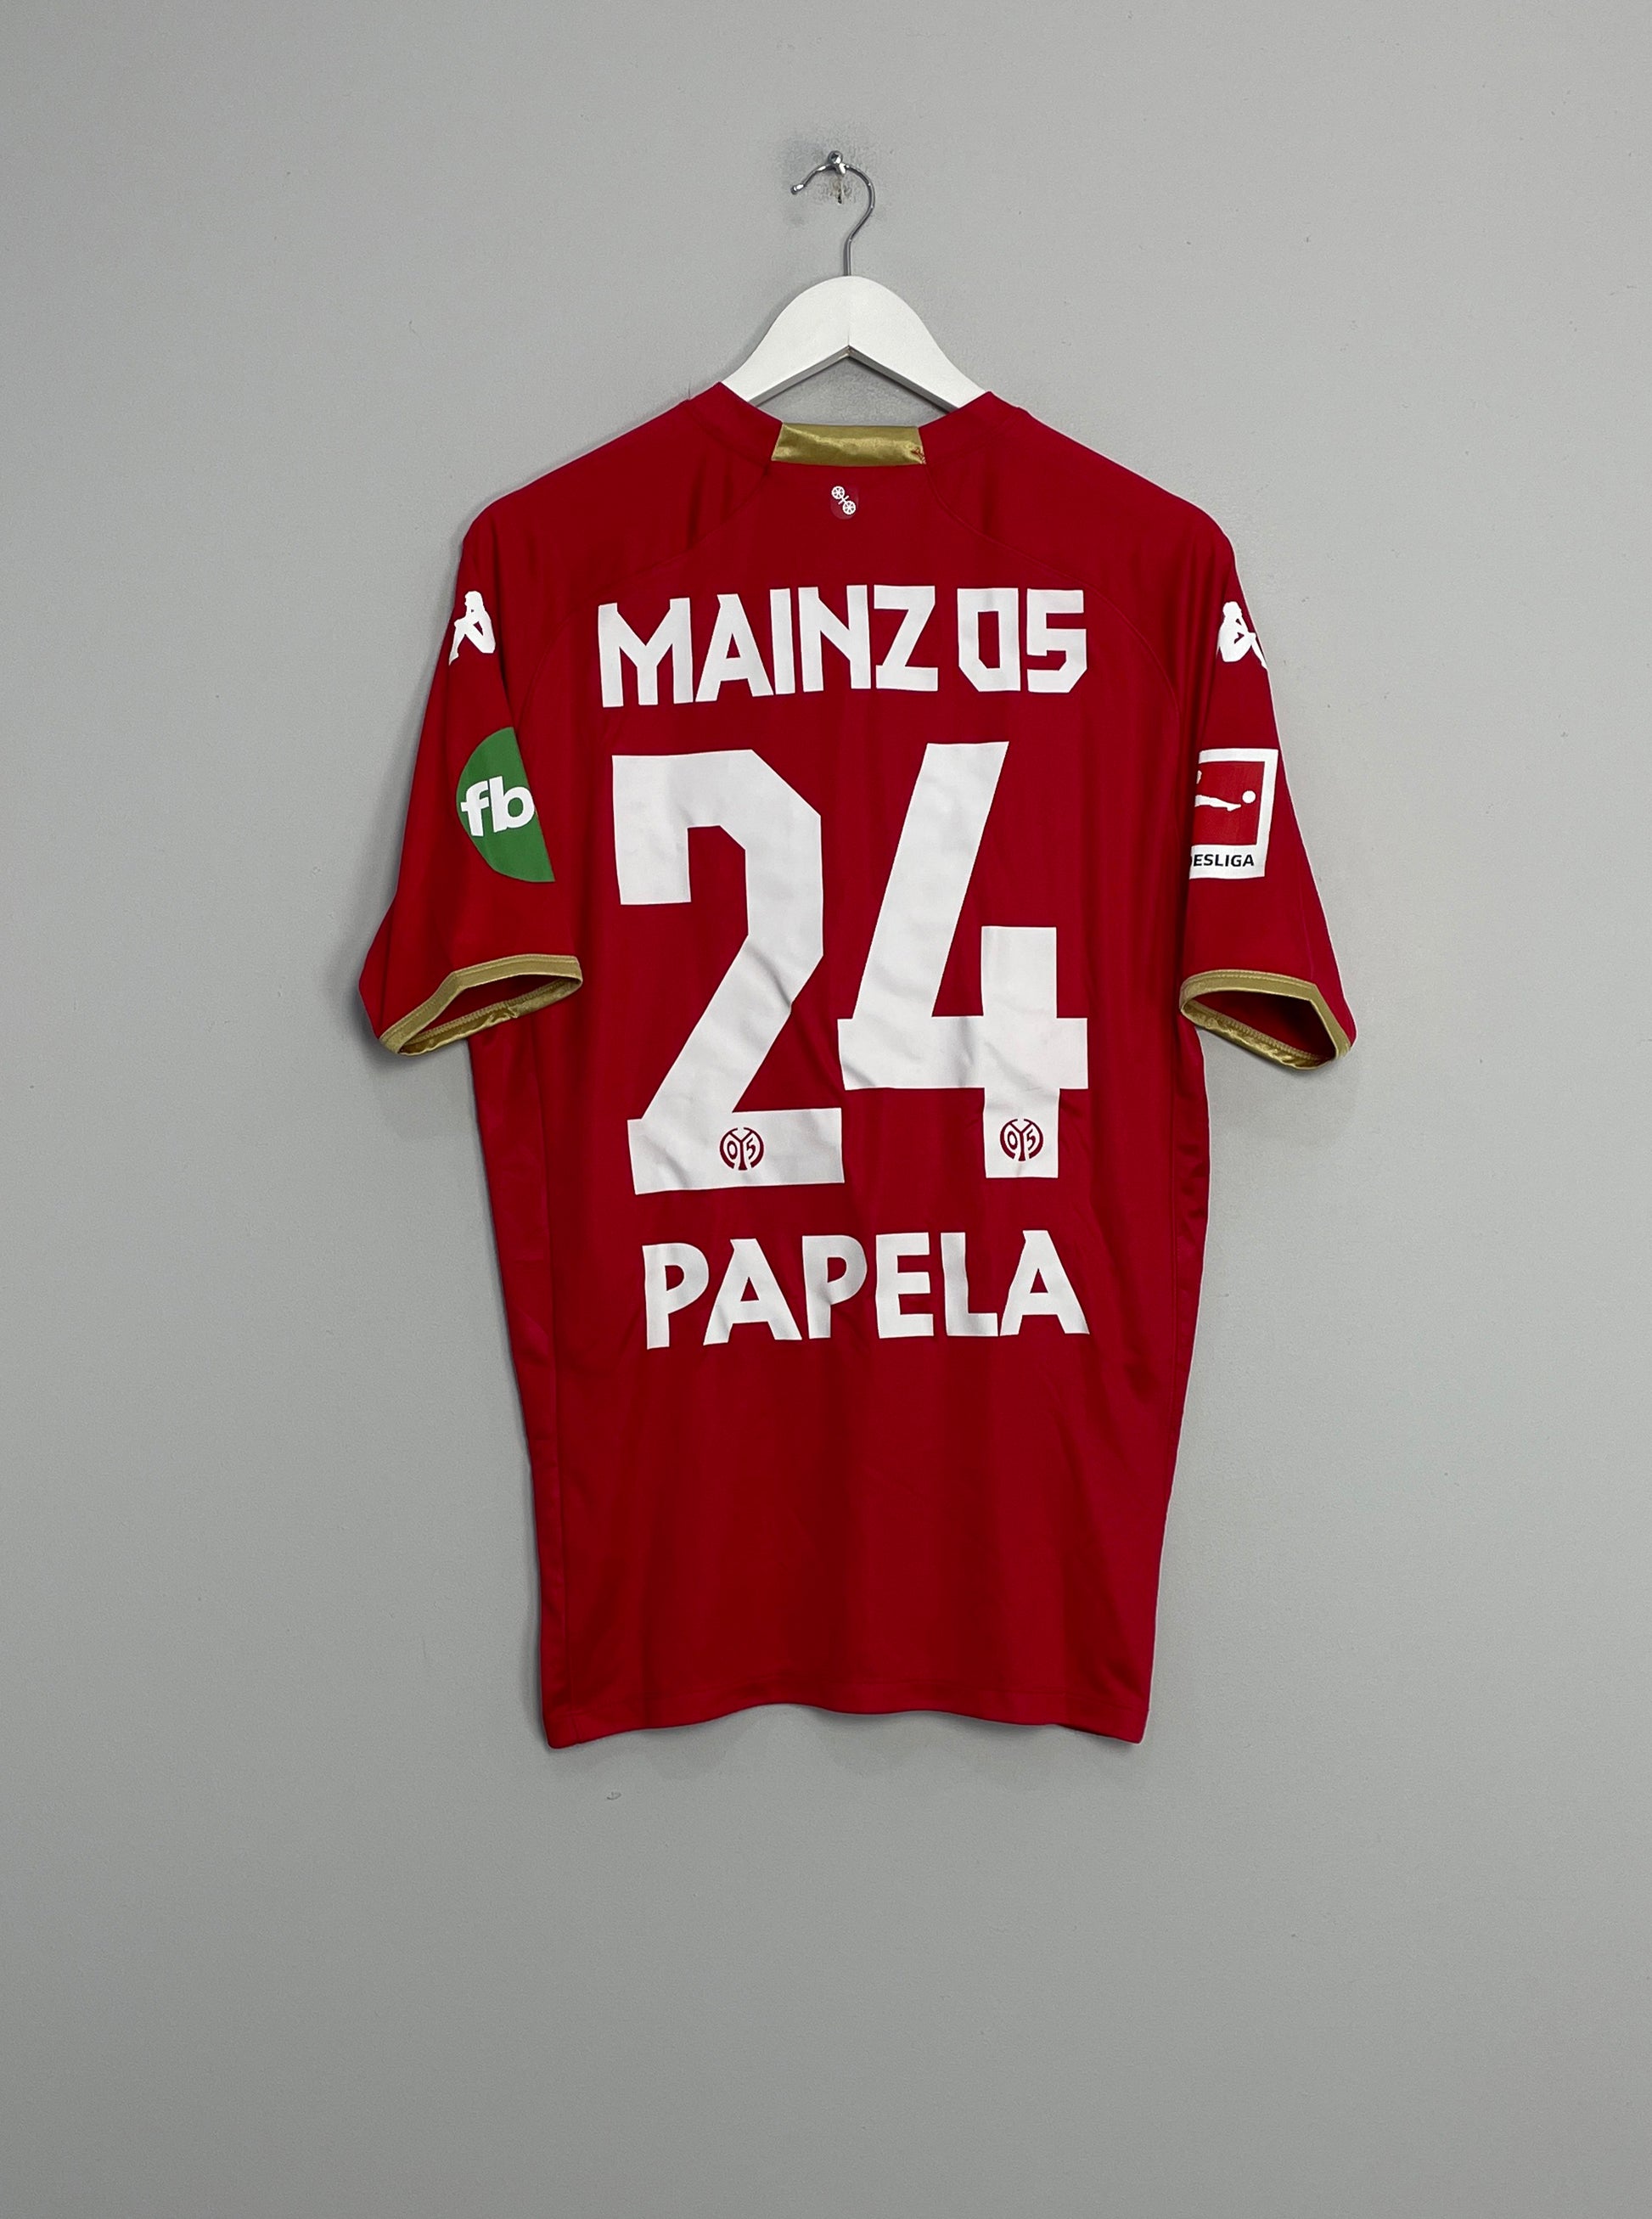 Image of the FC Mainz Papela shirt from the 2021/22 season